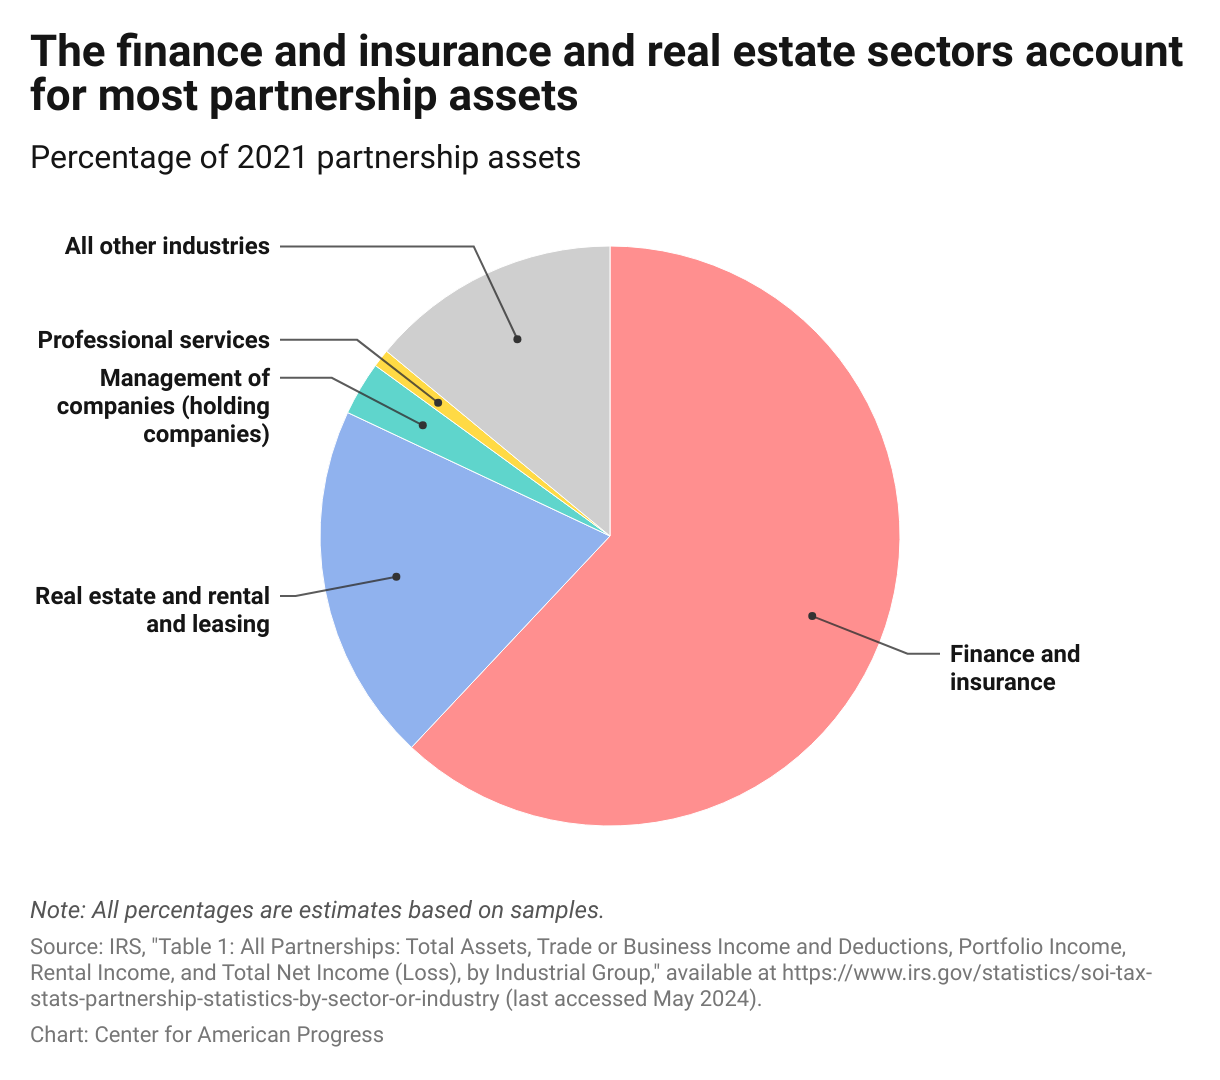 Pie chart showing that the finance and insurance and real estate sectors accounted for 82 percent of partnership assets in 2021.